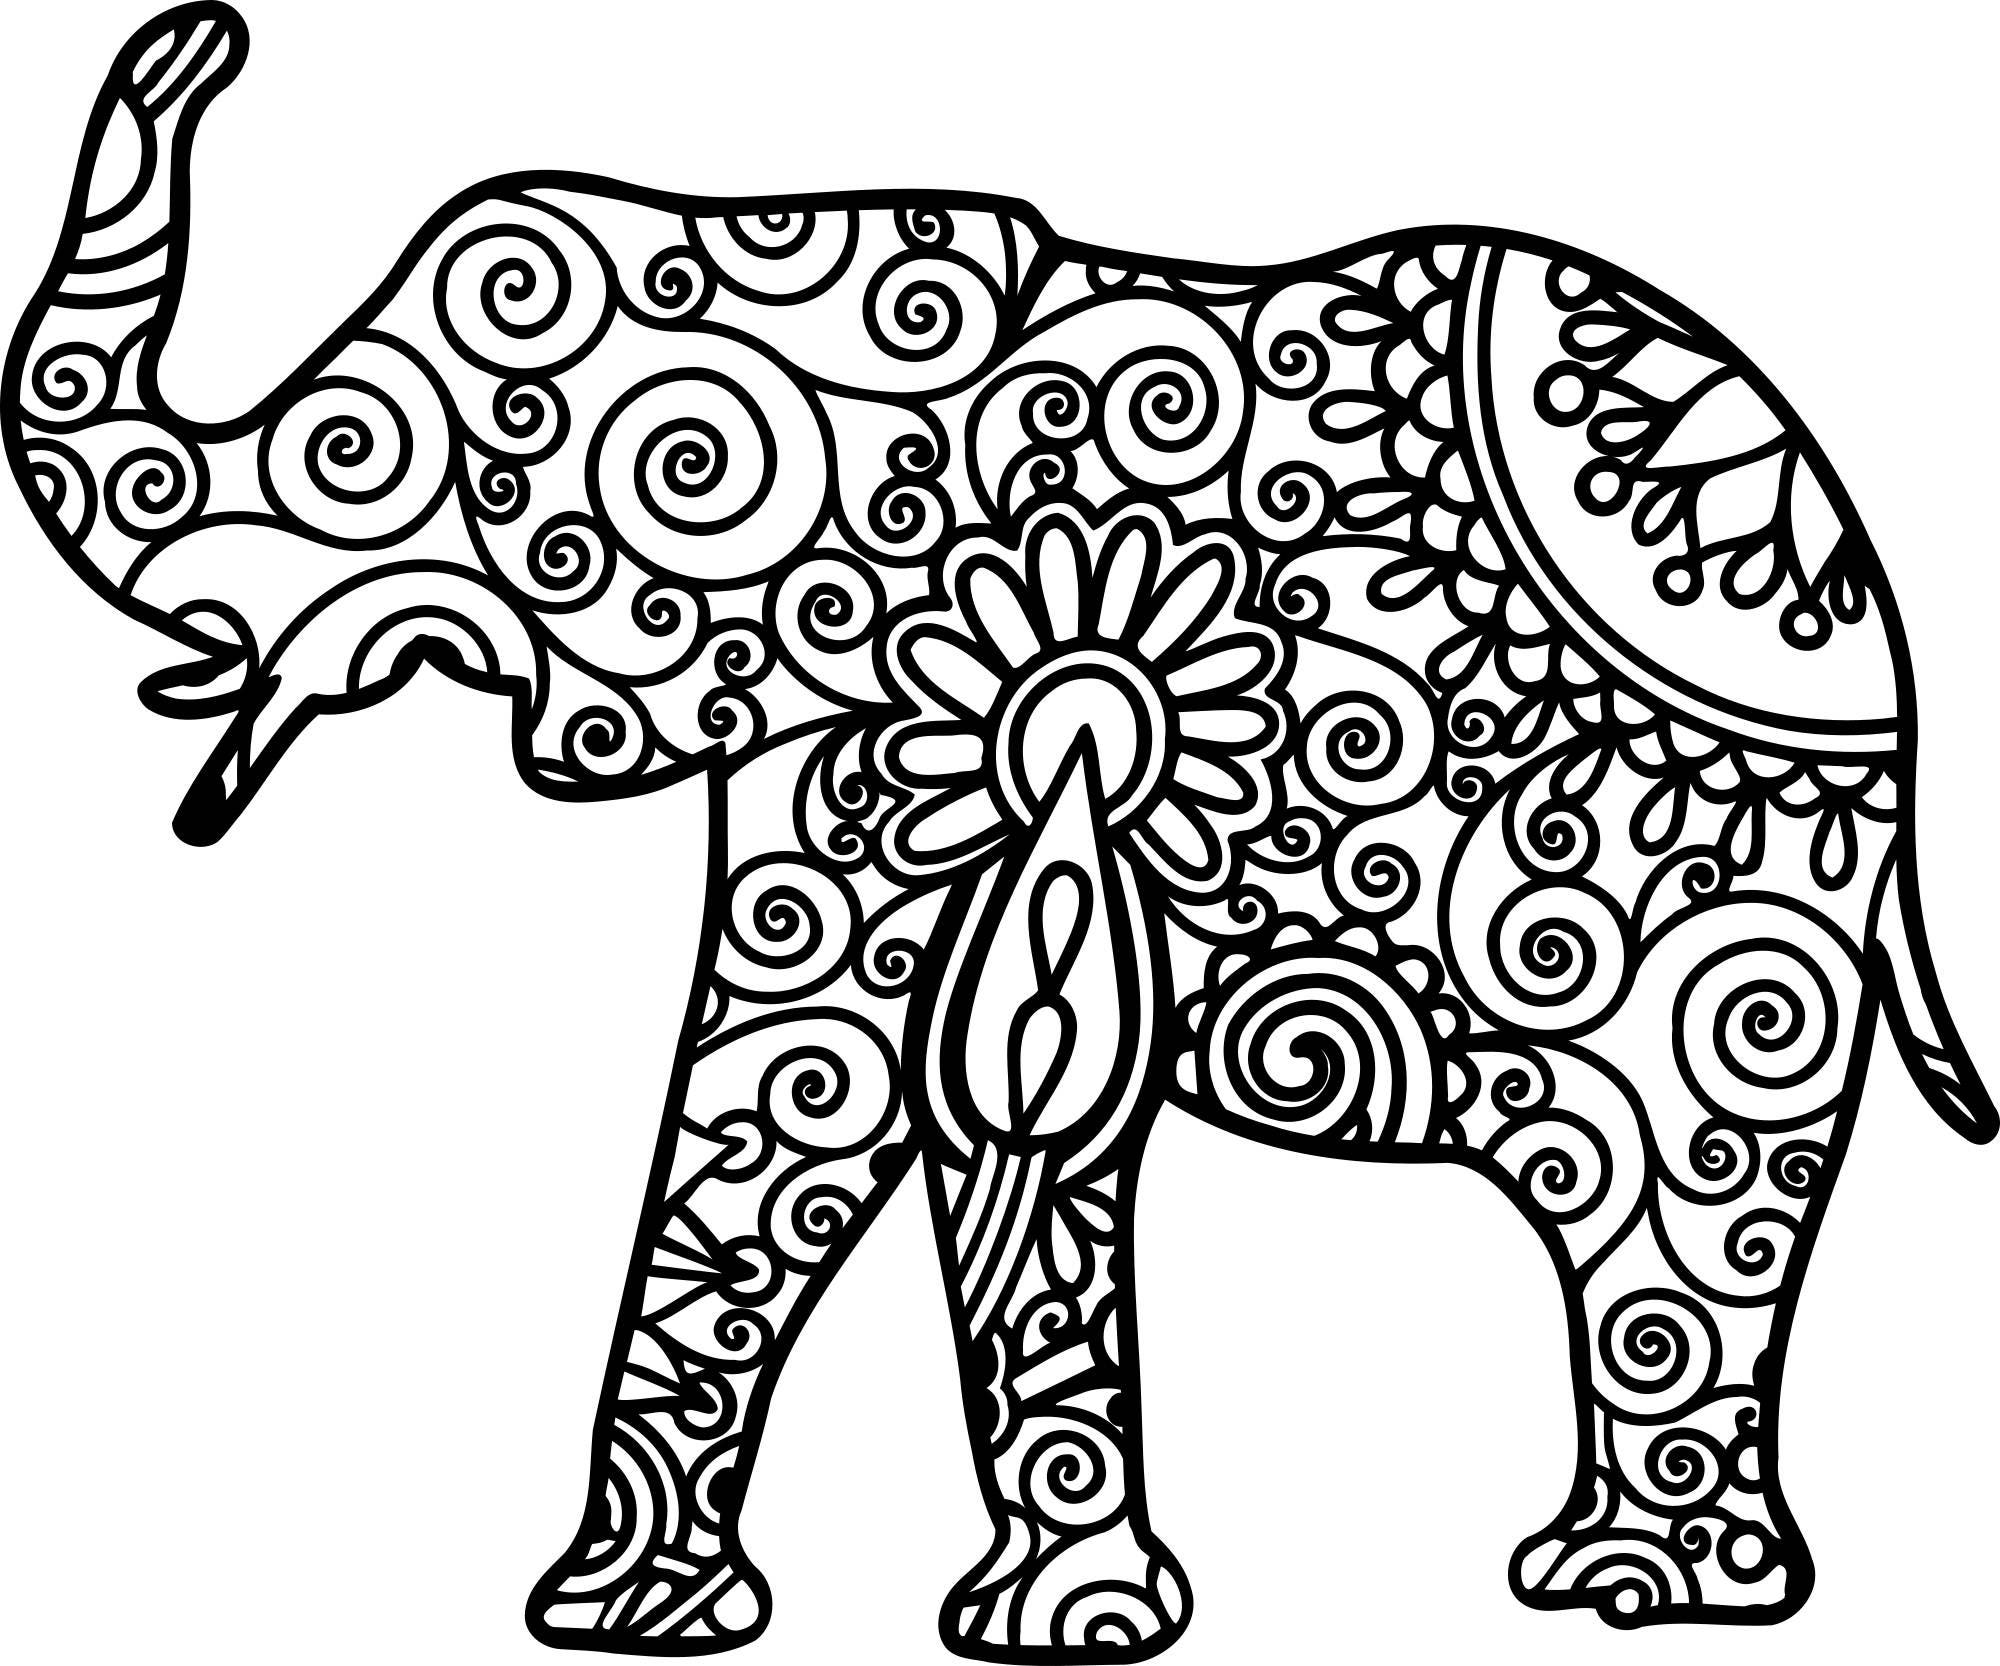 Download 26 Best Ideas For Coloring Free Elephant Mandala Svg